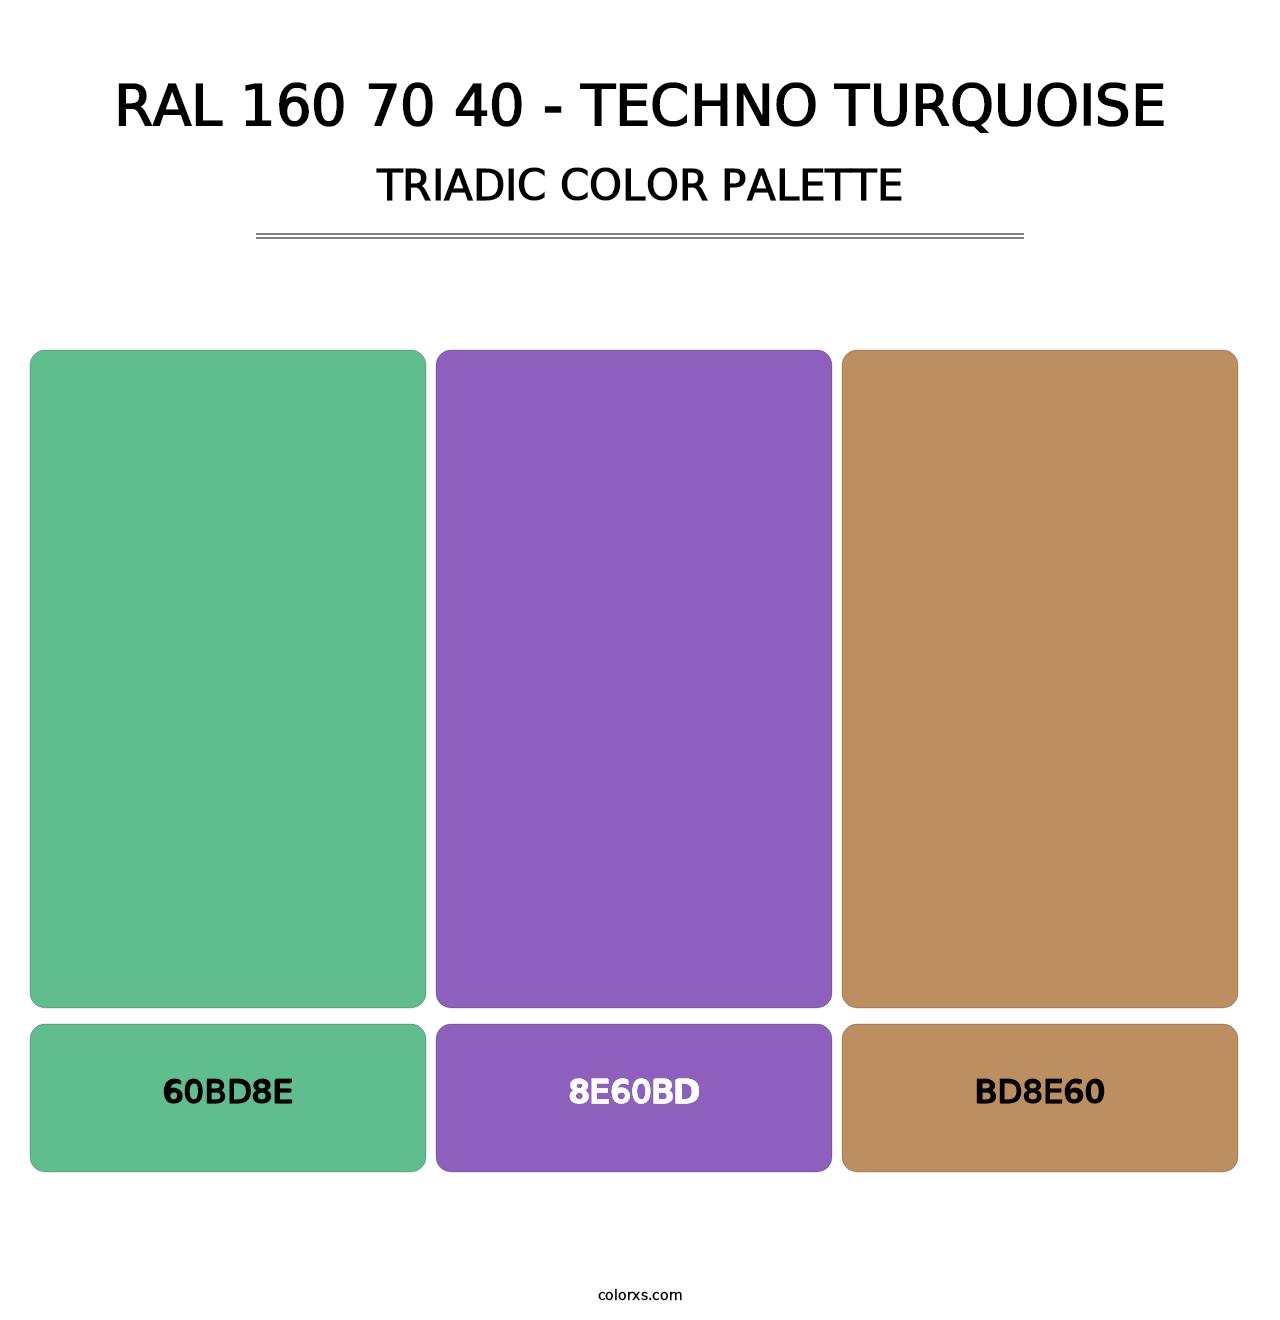 RAL 160 70 40 - Techno Turquoise - Triadic Color Palette